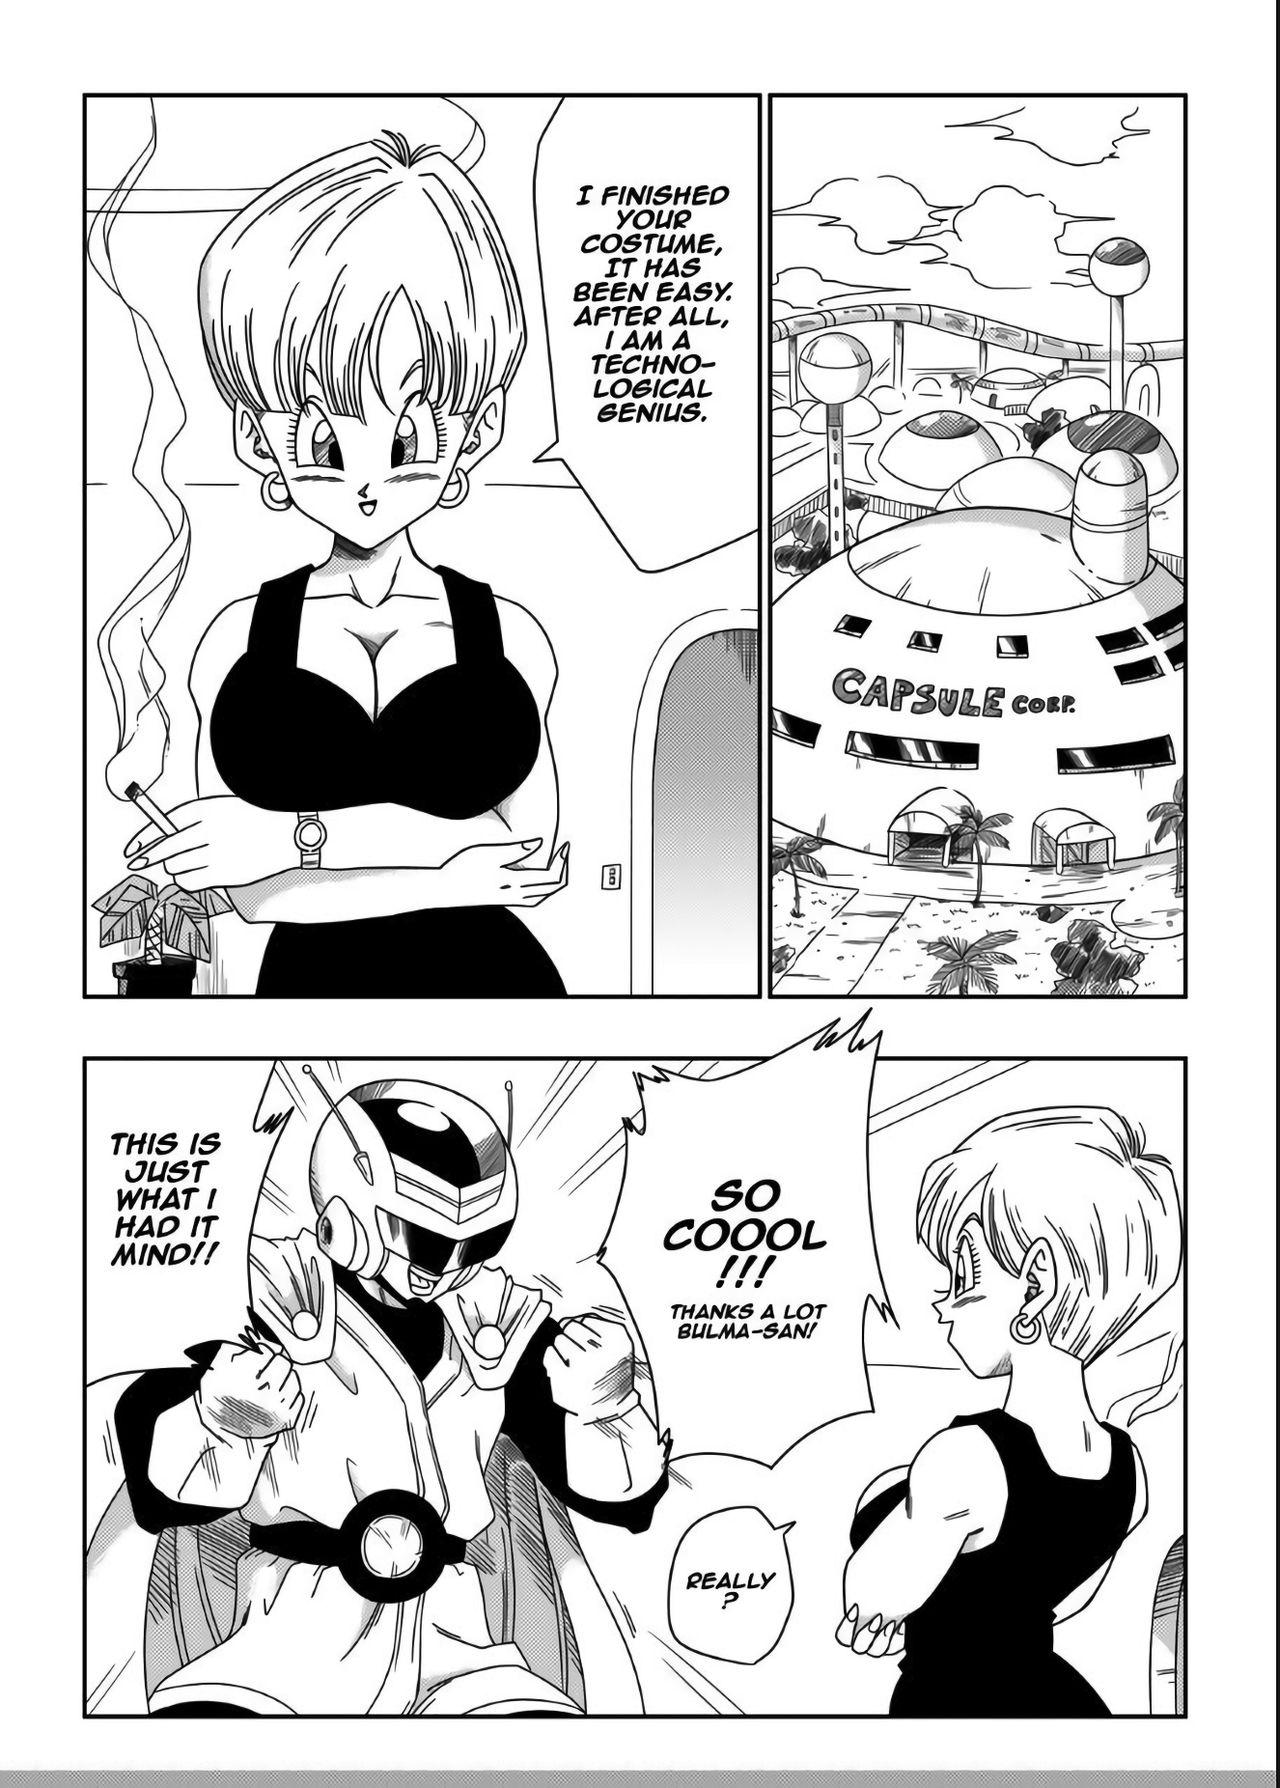 Woman Fucking LOVE TRIANGLE Z PART 3 - Dragon ball z Camporn - Page 2